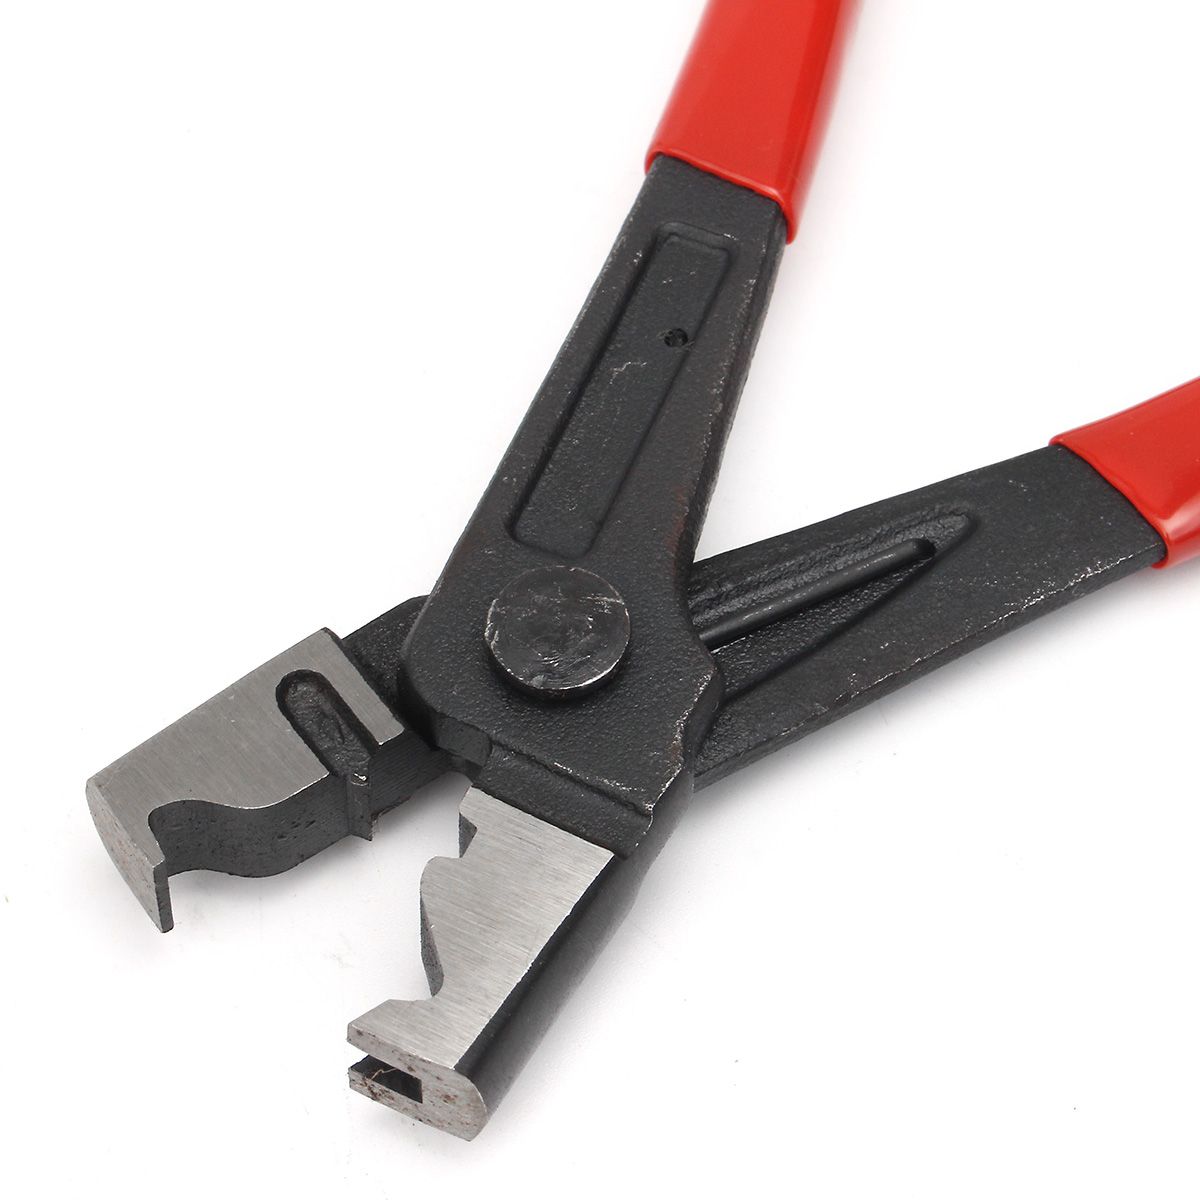 Hose-Clips-Plier-Clic-R-Type-Collar-Swivel-Drive-Shafts-Angle-CV-Boot-Clamp-1133867